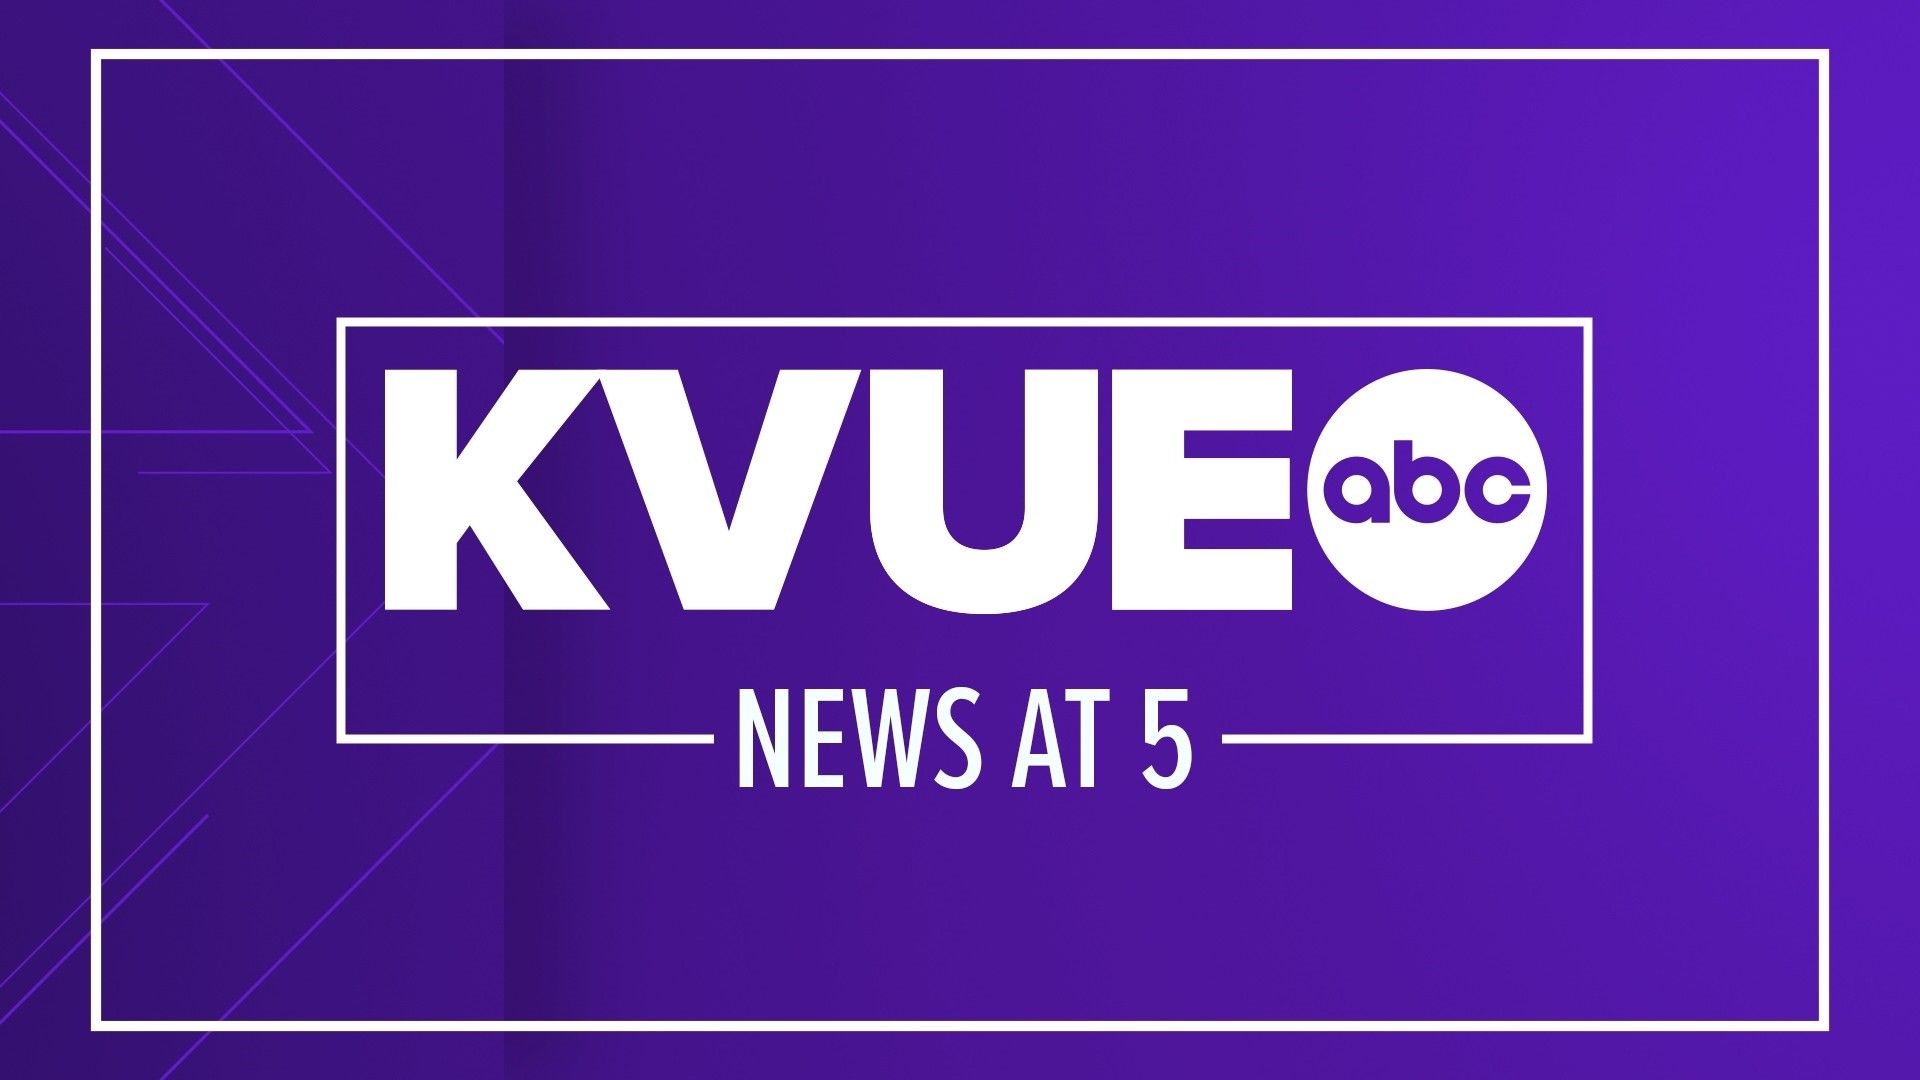 The KVUE News team offers a report on the latest news of the day, as well as updates on sports, Austin-area weather and travel issues on local roadways.